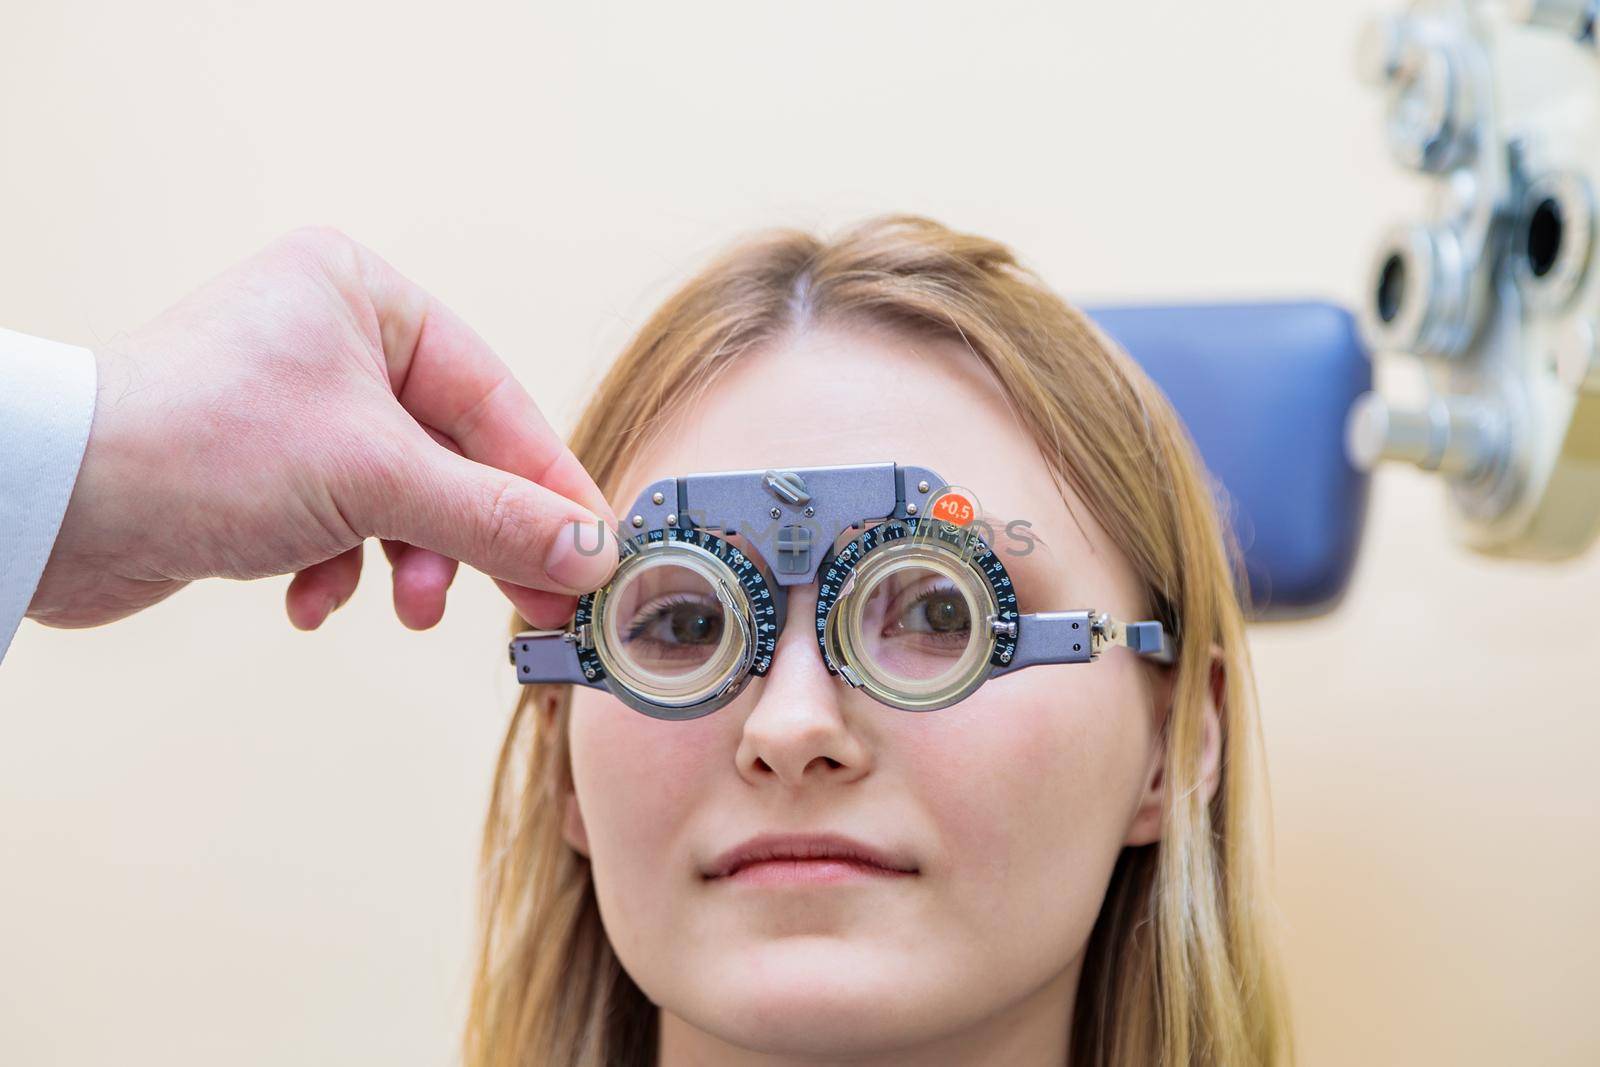 A male optometrist checks the eyesight of a young girl with a trial frame.